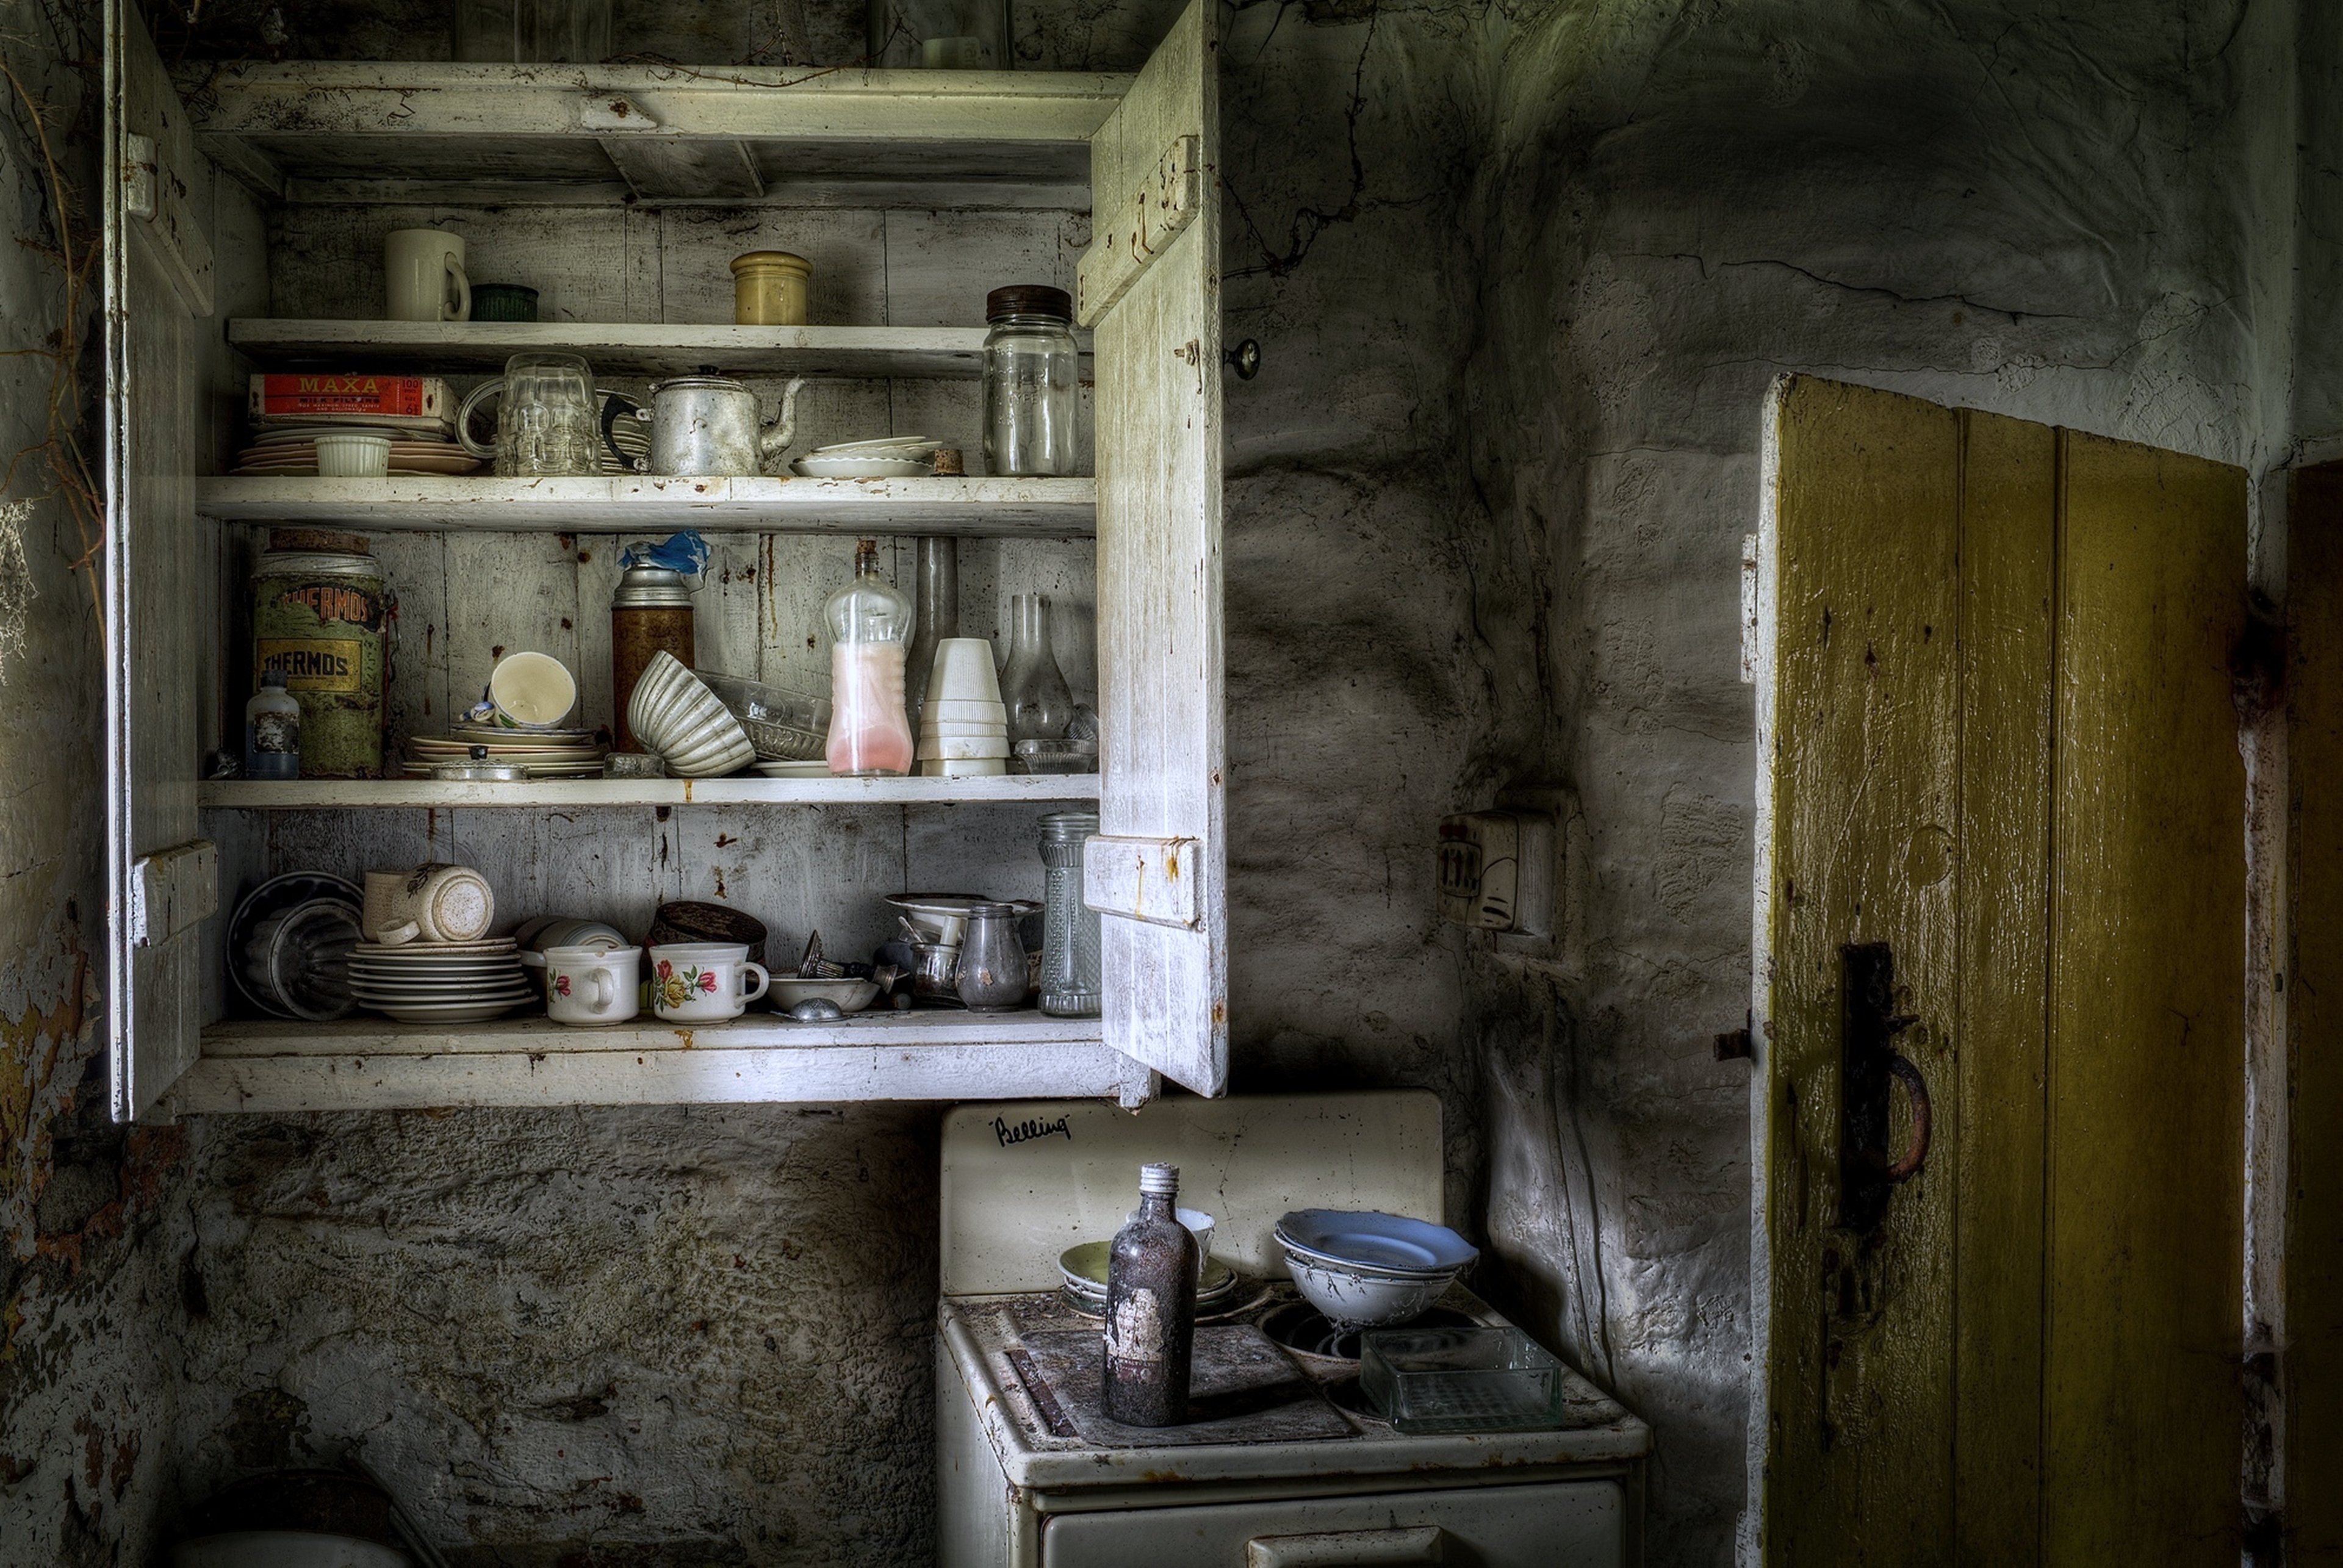 house, Hut, Poverty, Poor, Utensils, Old, Suffering, Conviction, Misery, Happiness Wallpaper